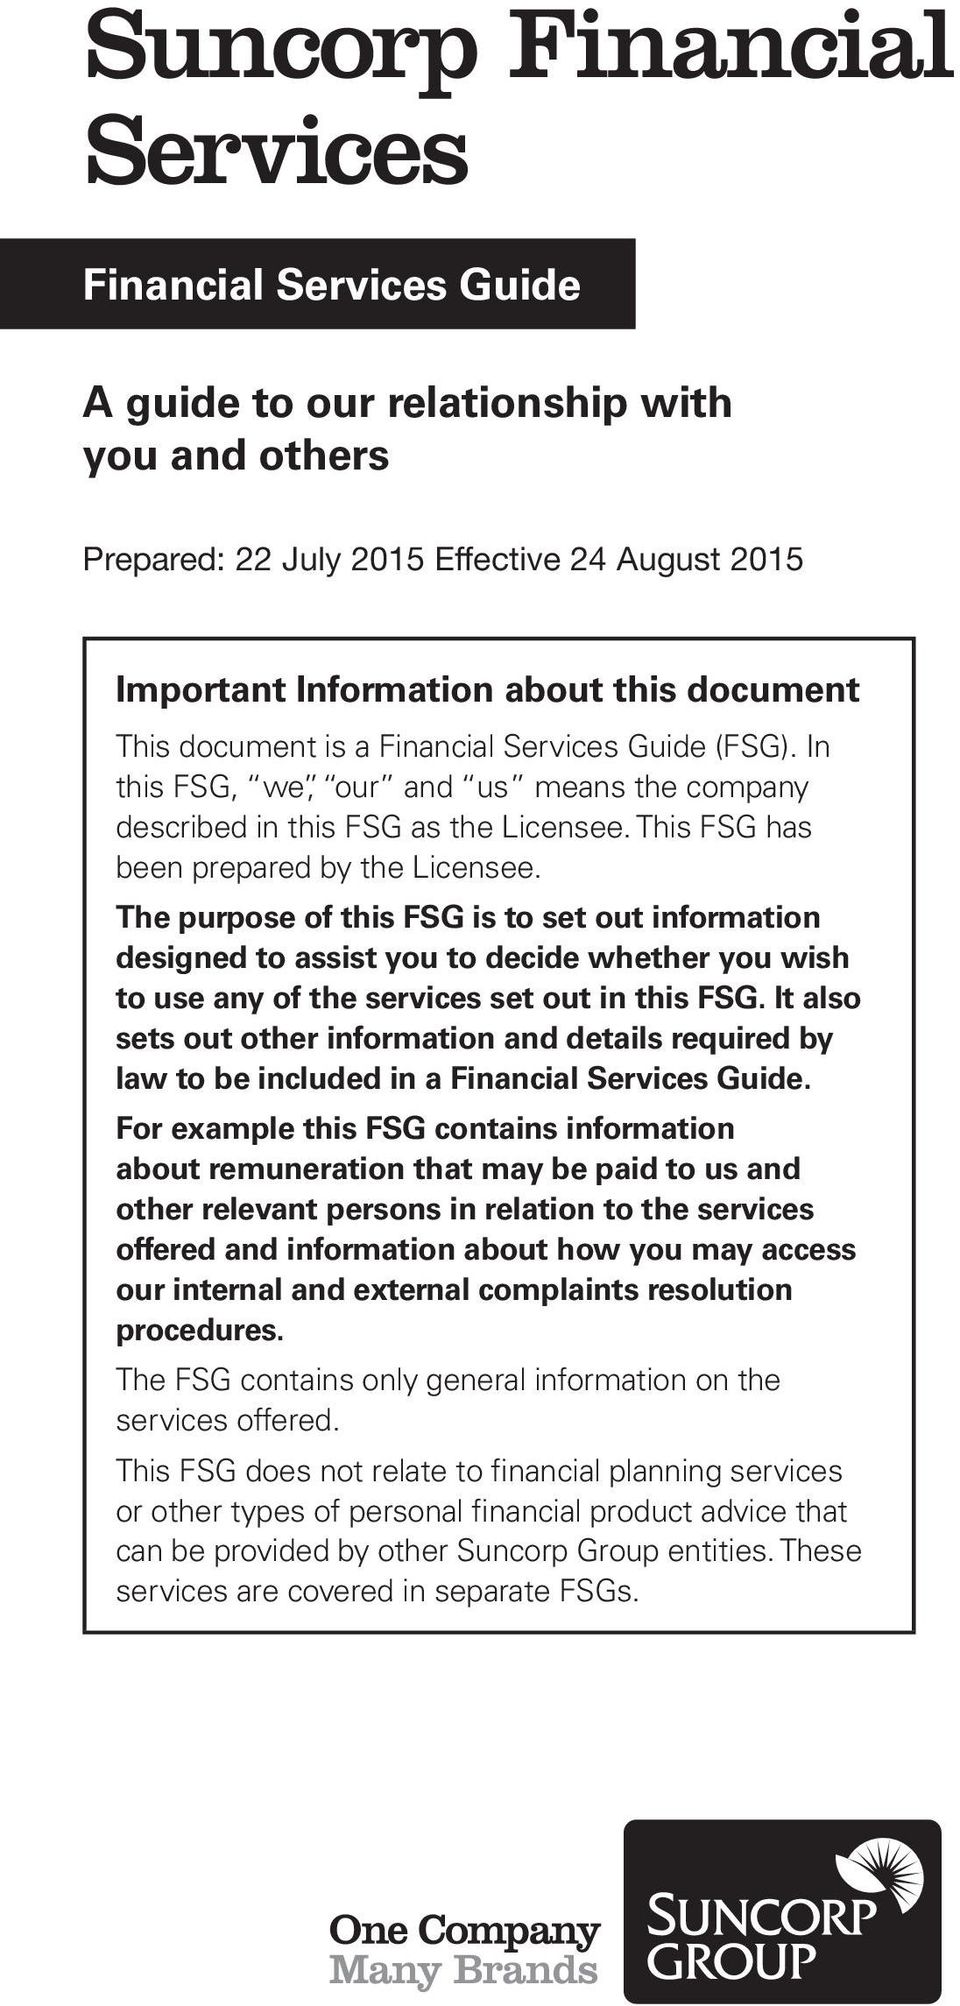 The purpose of this FSG is to set out information designed to assist you to decide whether you wish to use any of the services set out in this FSG.